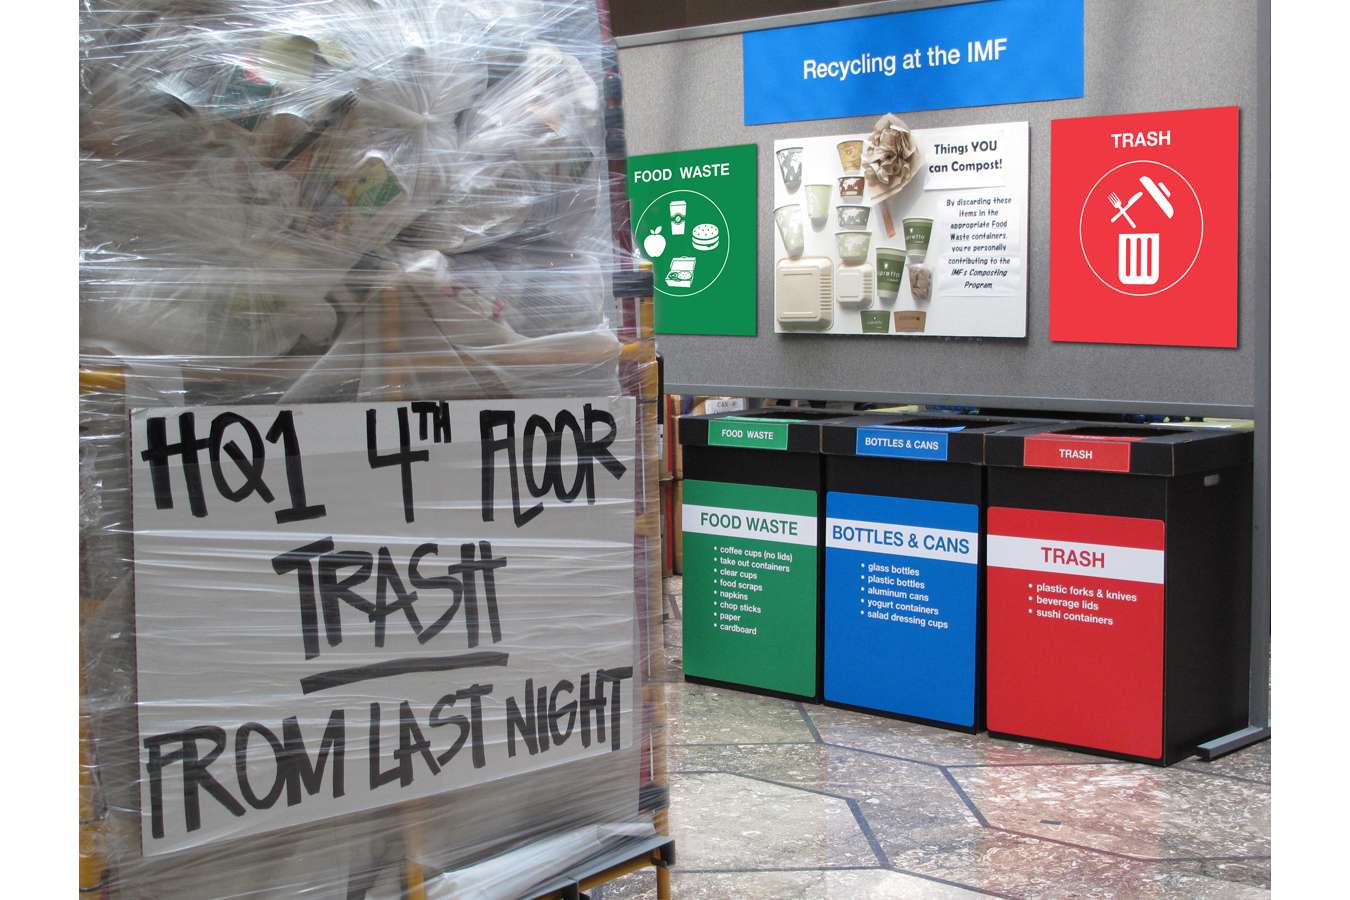 IMF Pic 1 : Paper recycled from the 4th floor of HQ1 building | Cafeteria recycling bin graphics